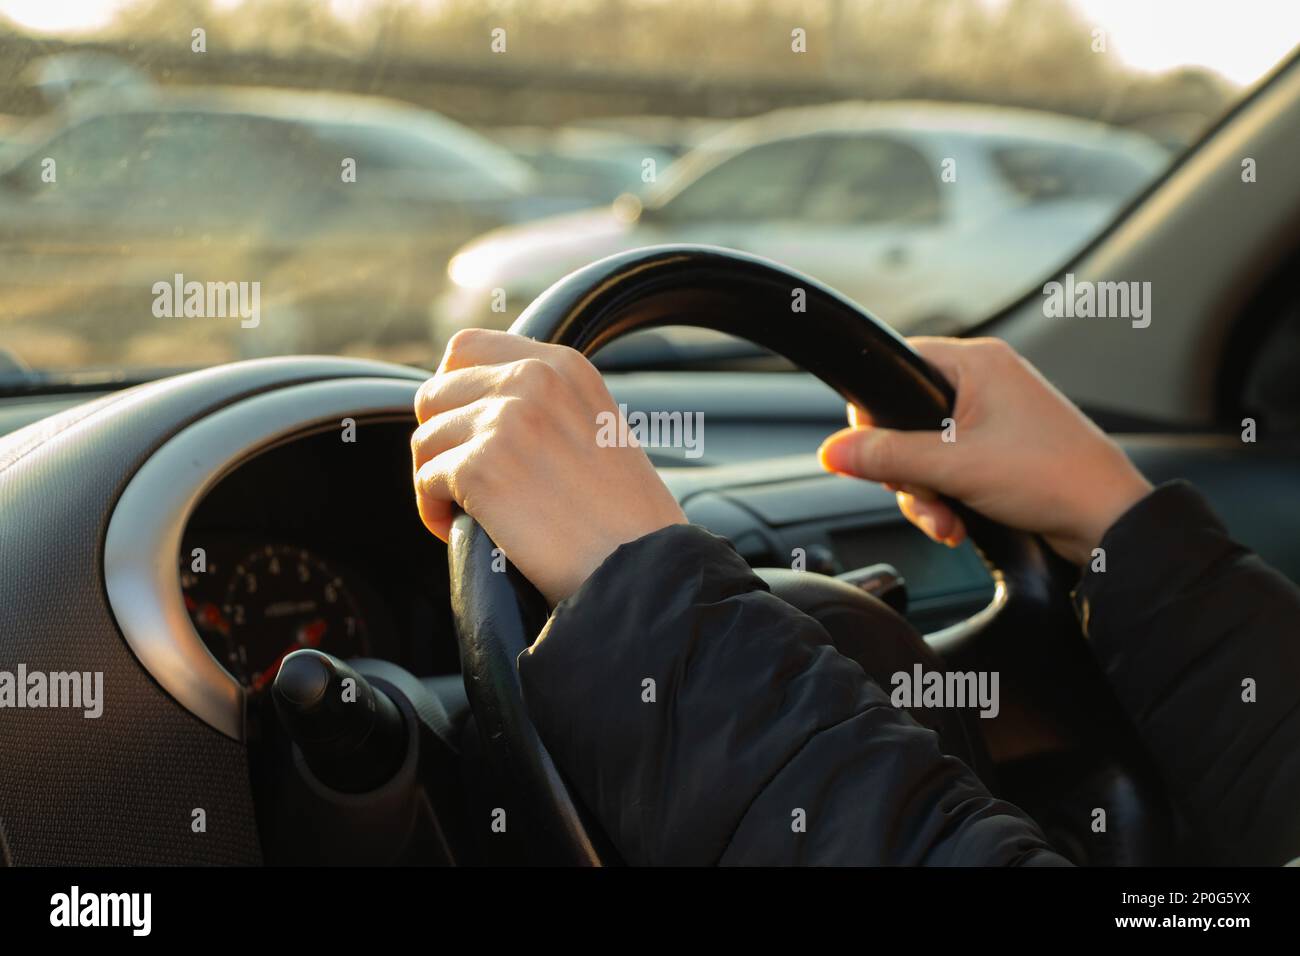 hands on the steering wheel inside the car in the afternoon Stock Photo